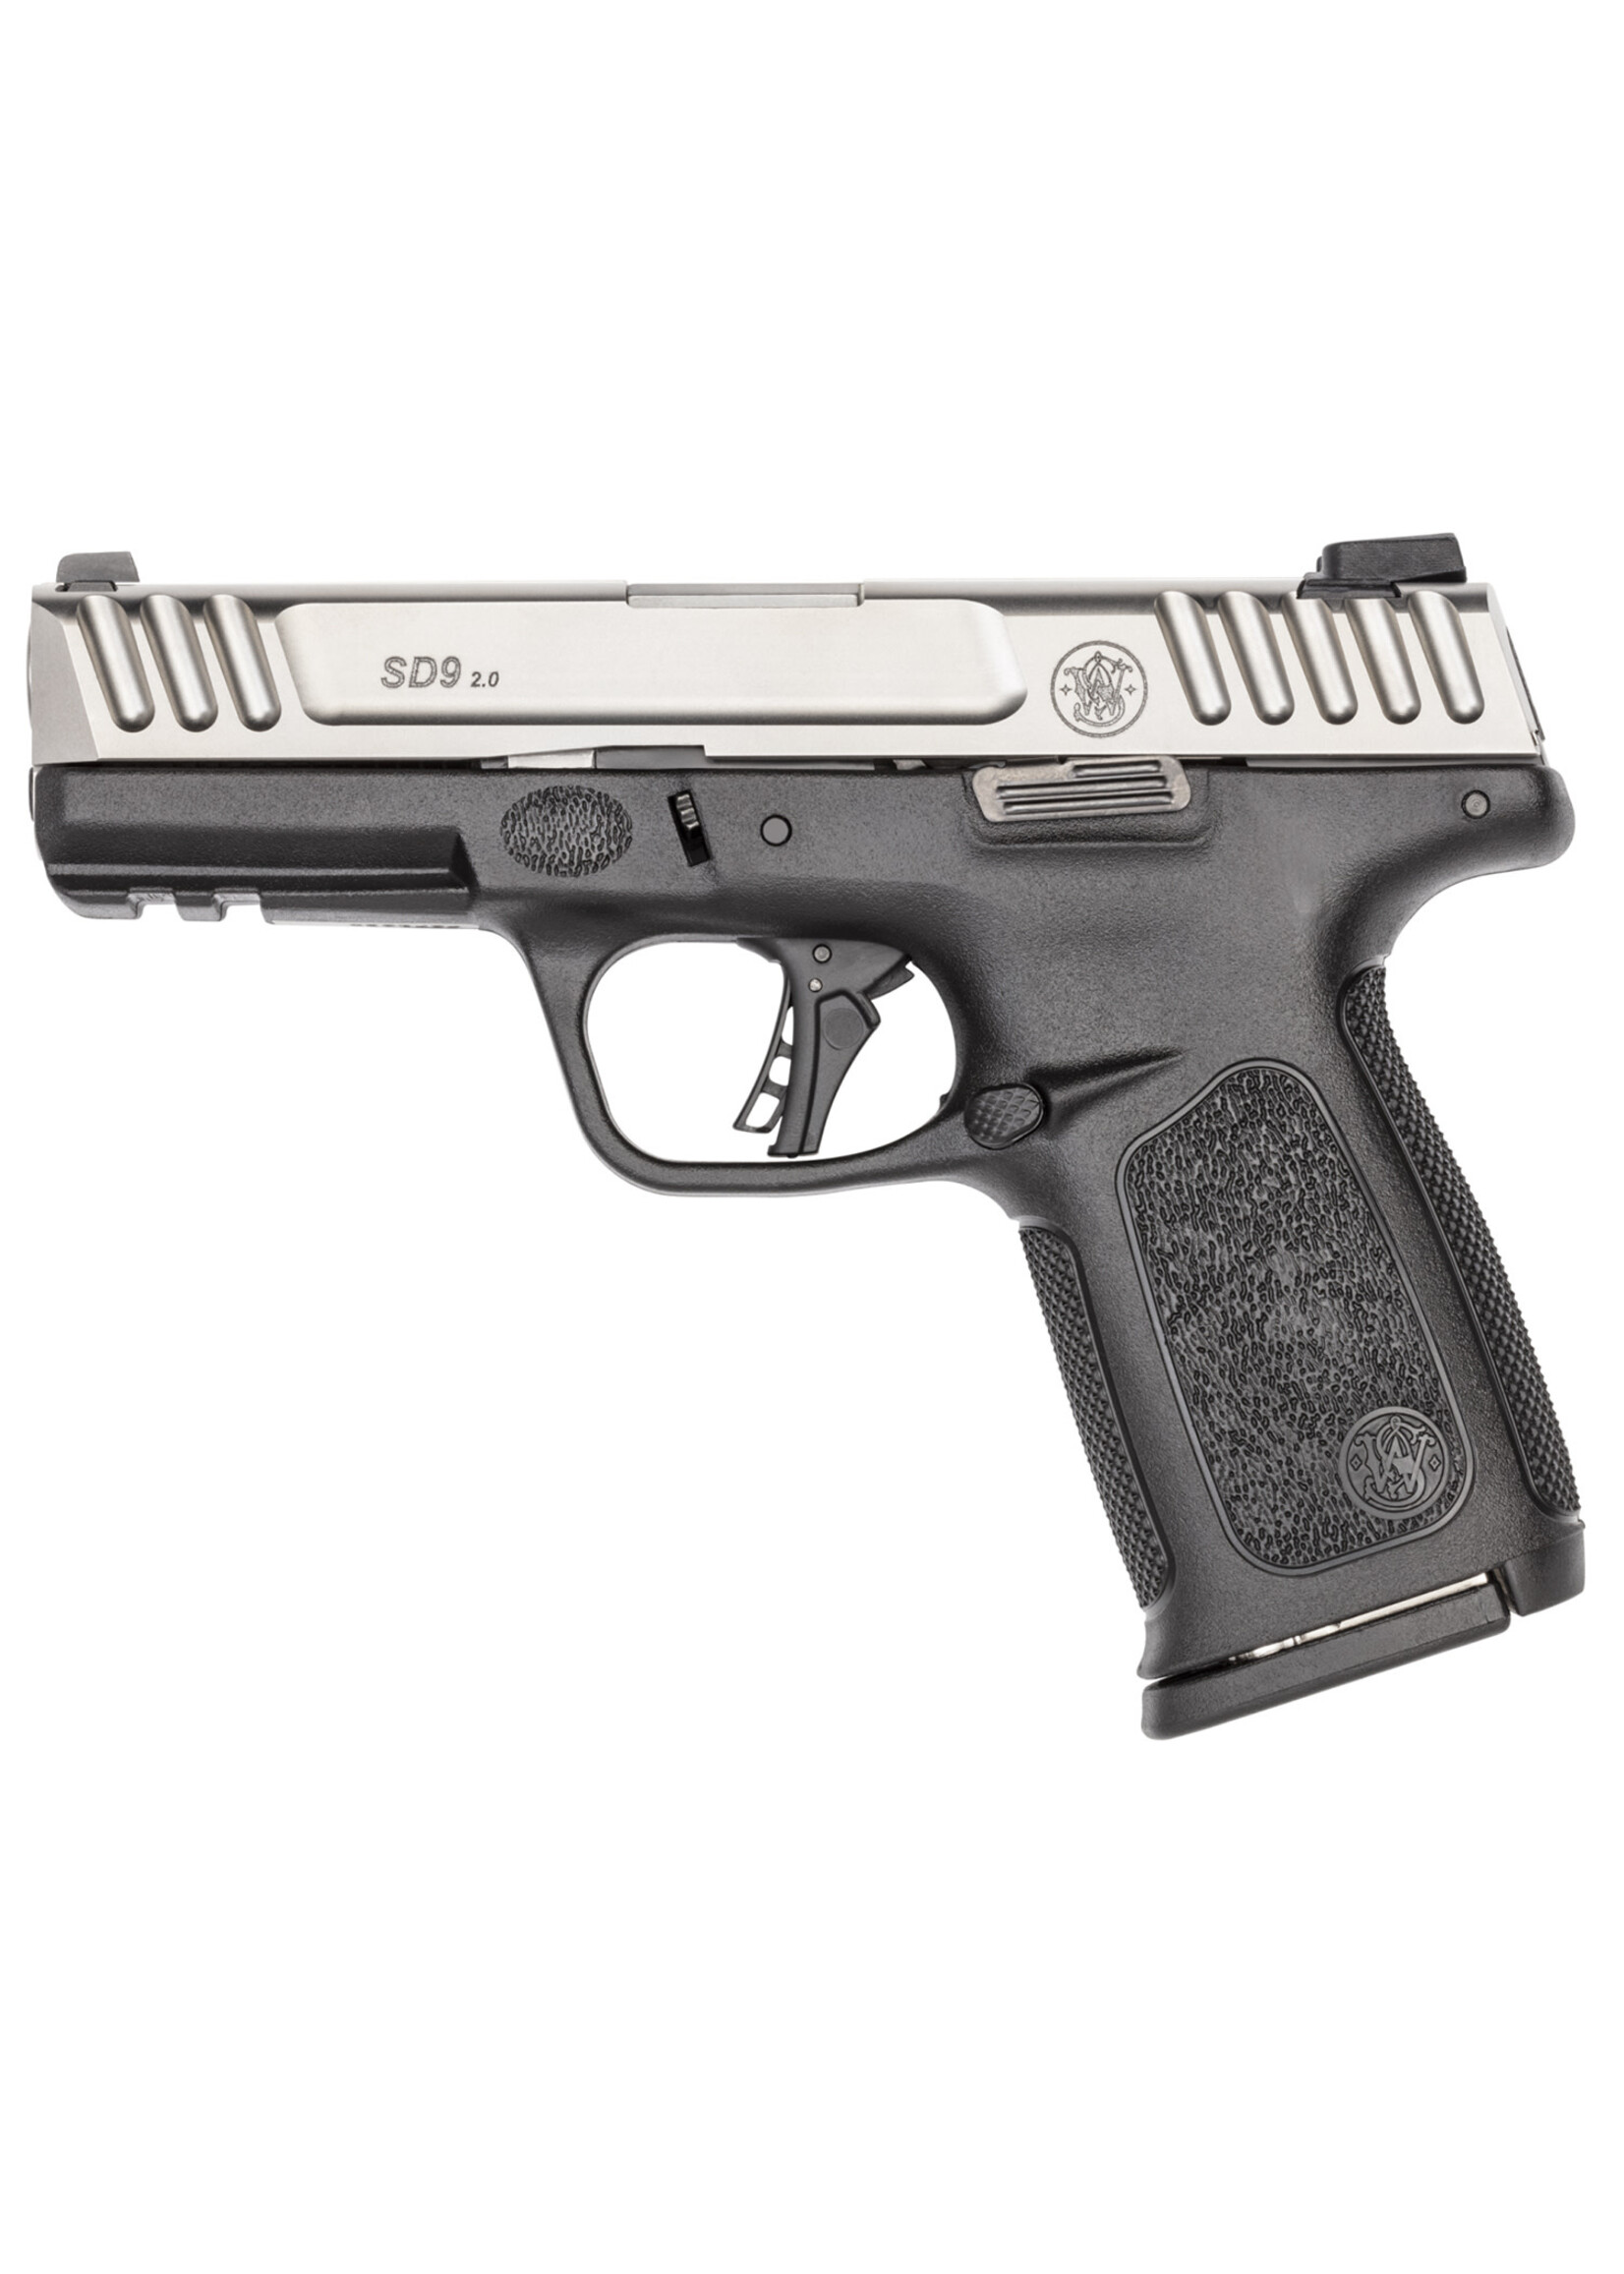 Smith and Wesson (S&W) Smith & Wesson 13931 SD9 2.0 Compact Frame 9mm Luger 16+1, 4" Stainless Steel Barrel, Satin Stainless Steel Serrated Slide, Black Polymer Frame w/Picatinny Rail, Black Textured Polymer Grip